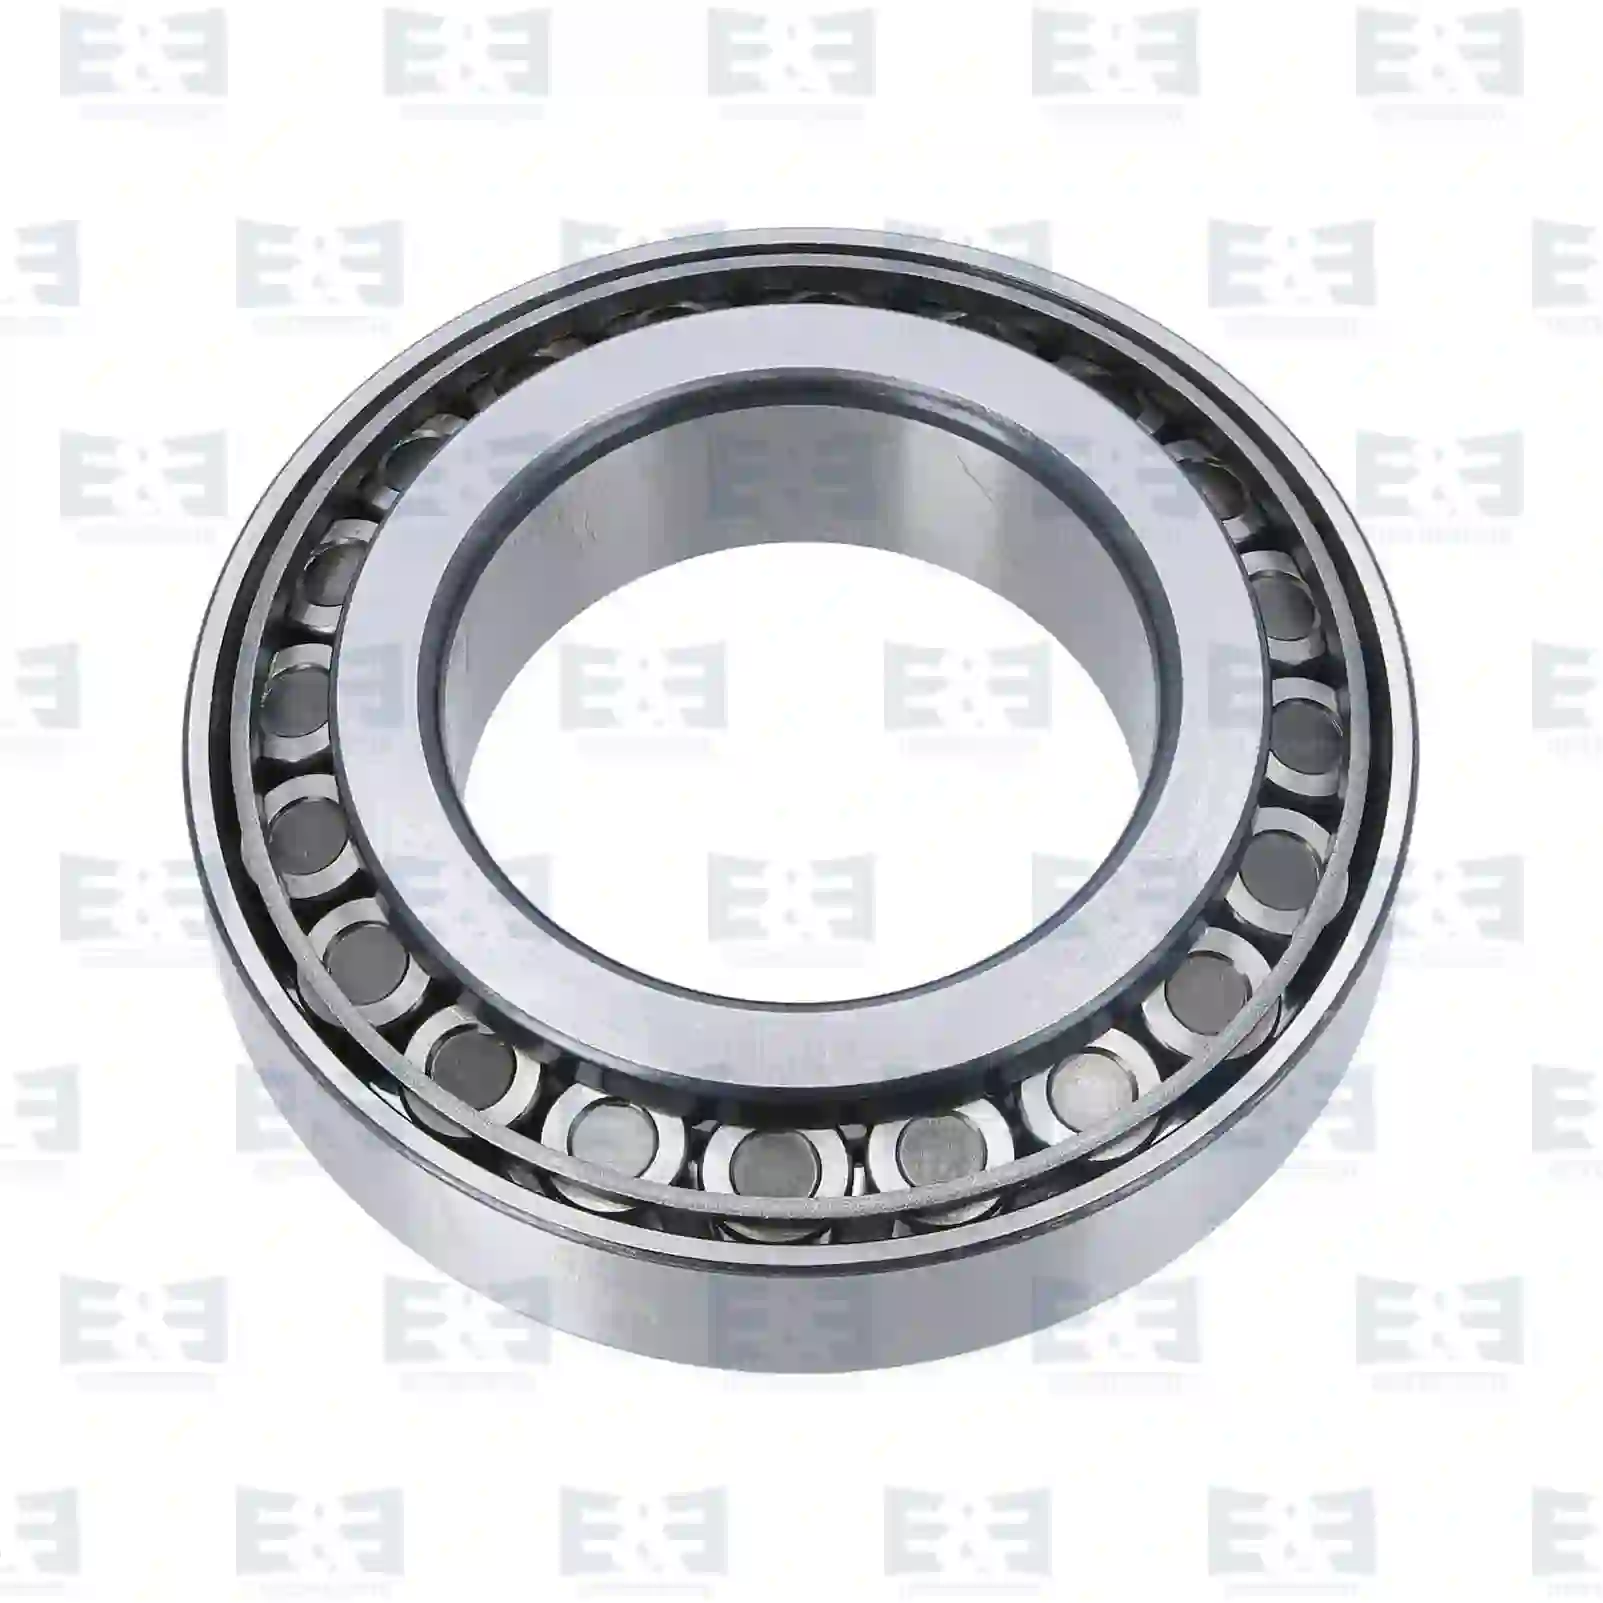 Bearings Tapered roller bearing, EE No 2E2286221 ,  oem no:6387761, 94036568, 94050705, 94060941, 1-09812048-0, 1-09812145-0, 1-09812146-0, 1-09812151-0, 1-09812167-0, 9-00093032-0, 26800220, 3612948000, 06324990006, 0009810305, 0009812401, 0009817205, 0009819405, 000720032216, 0069810605, 38324-90000, 0959232216, 0959532216, 14103, 6691159000, 11067 E&E Truck Spare Parts | Truck Spare Parts, Auotomotive Spare Parts